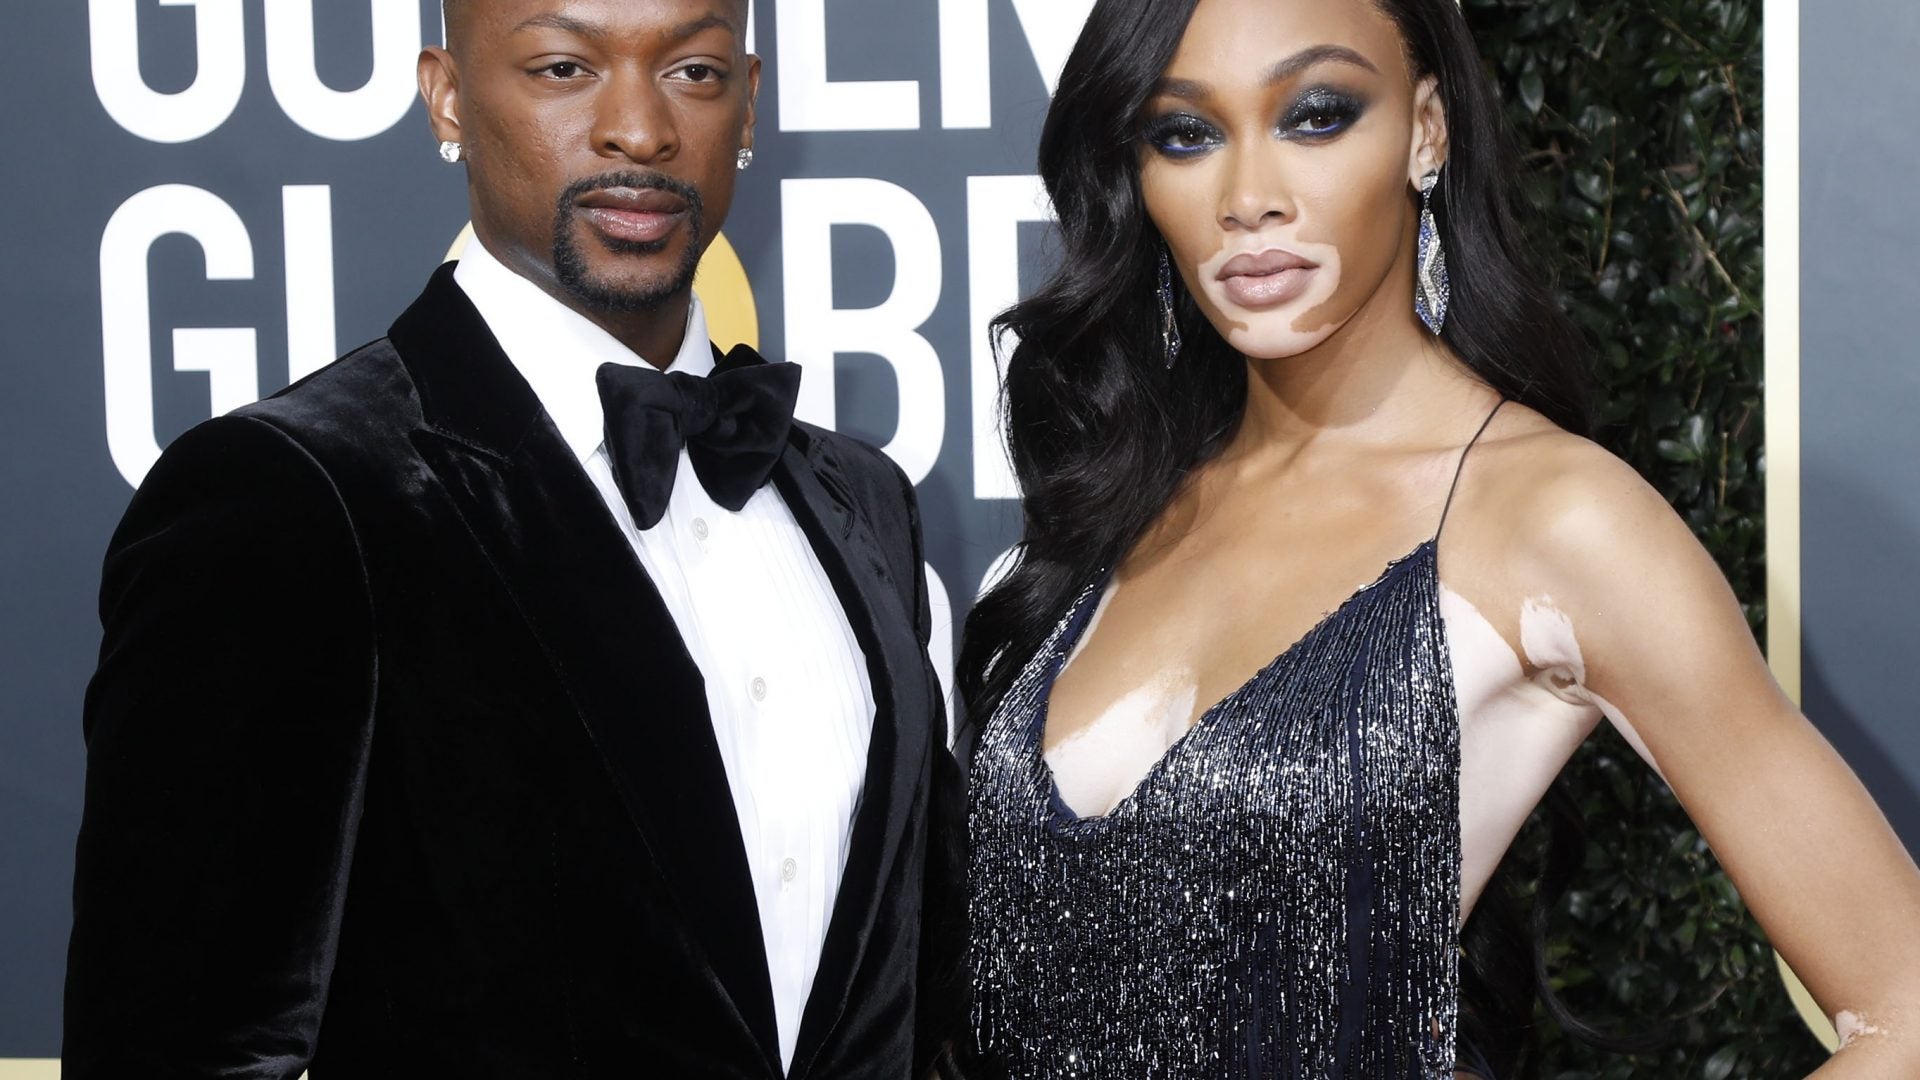 Winnie Harlow And Laquan Smith Were The Chicest Couple At The Golden Globes